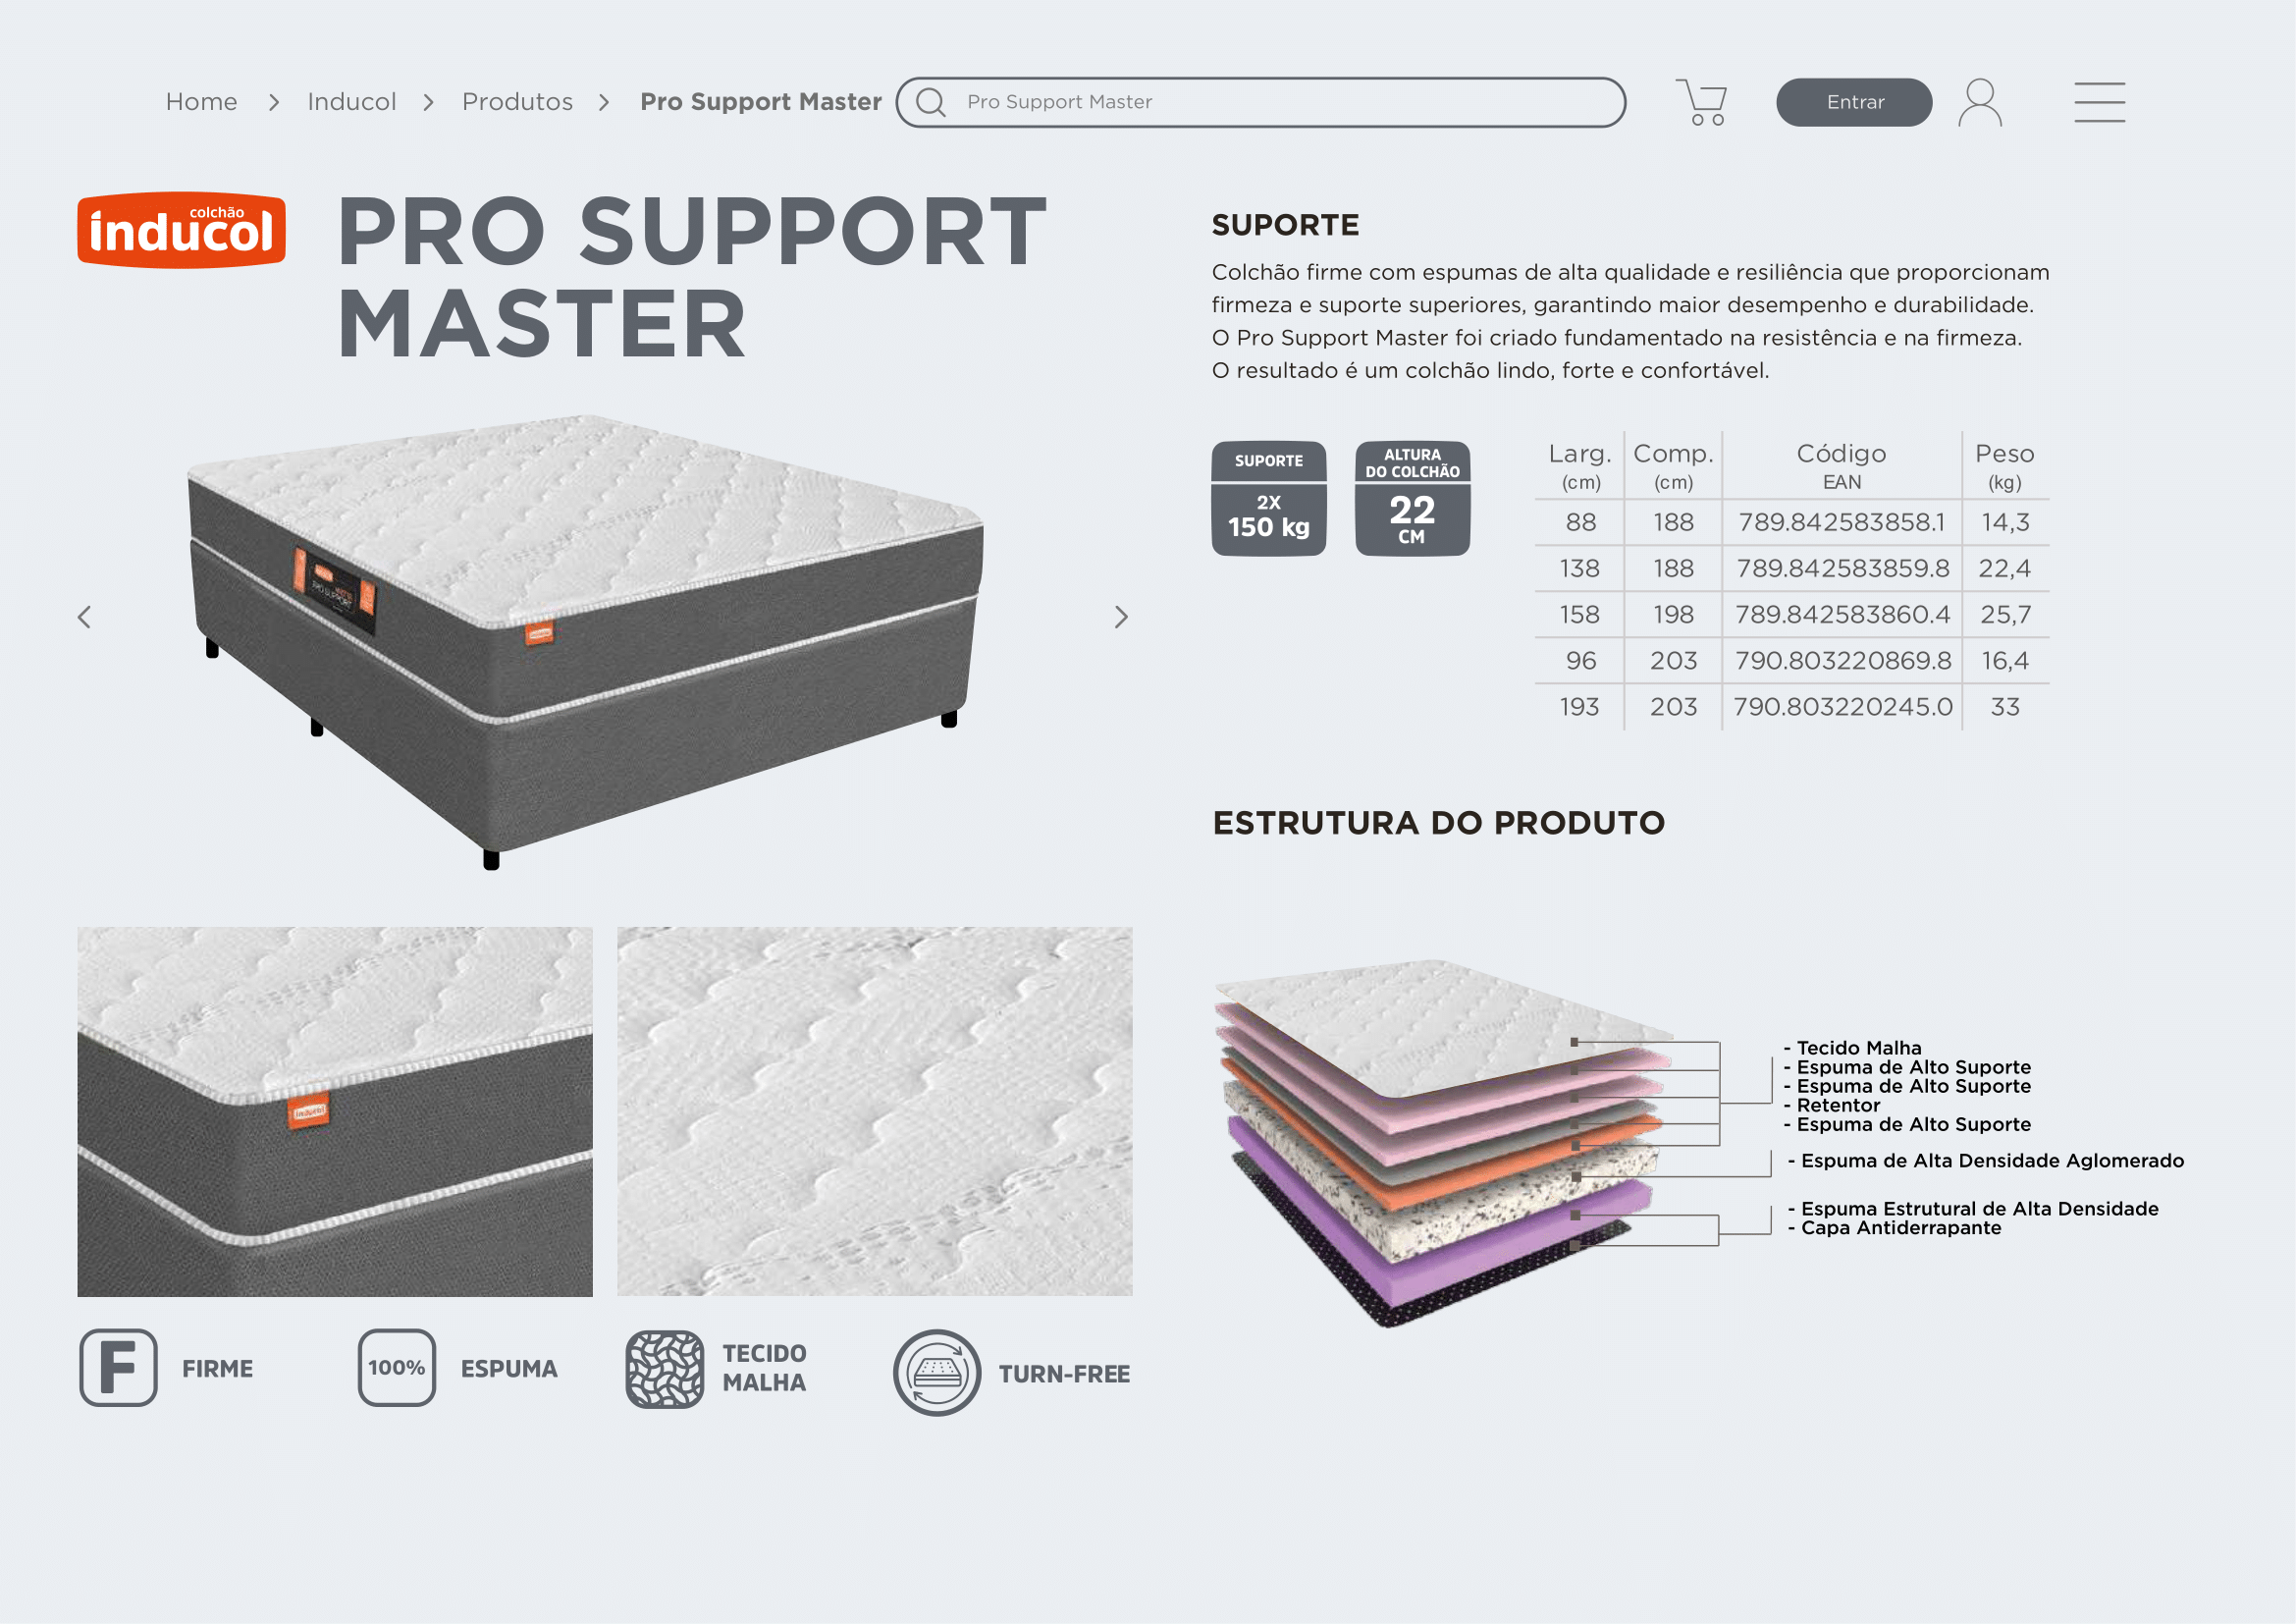 RoPro - Support